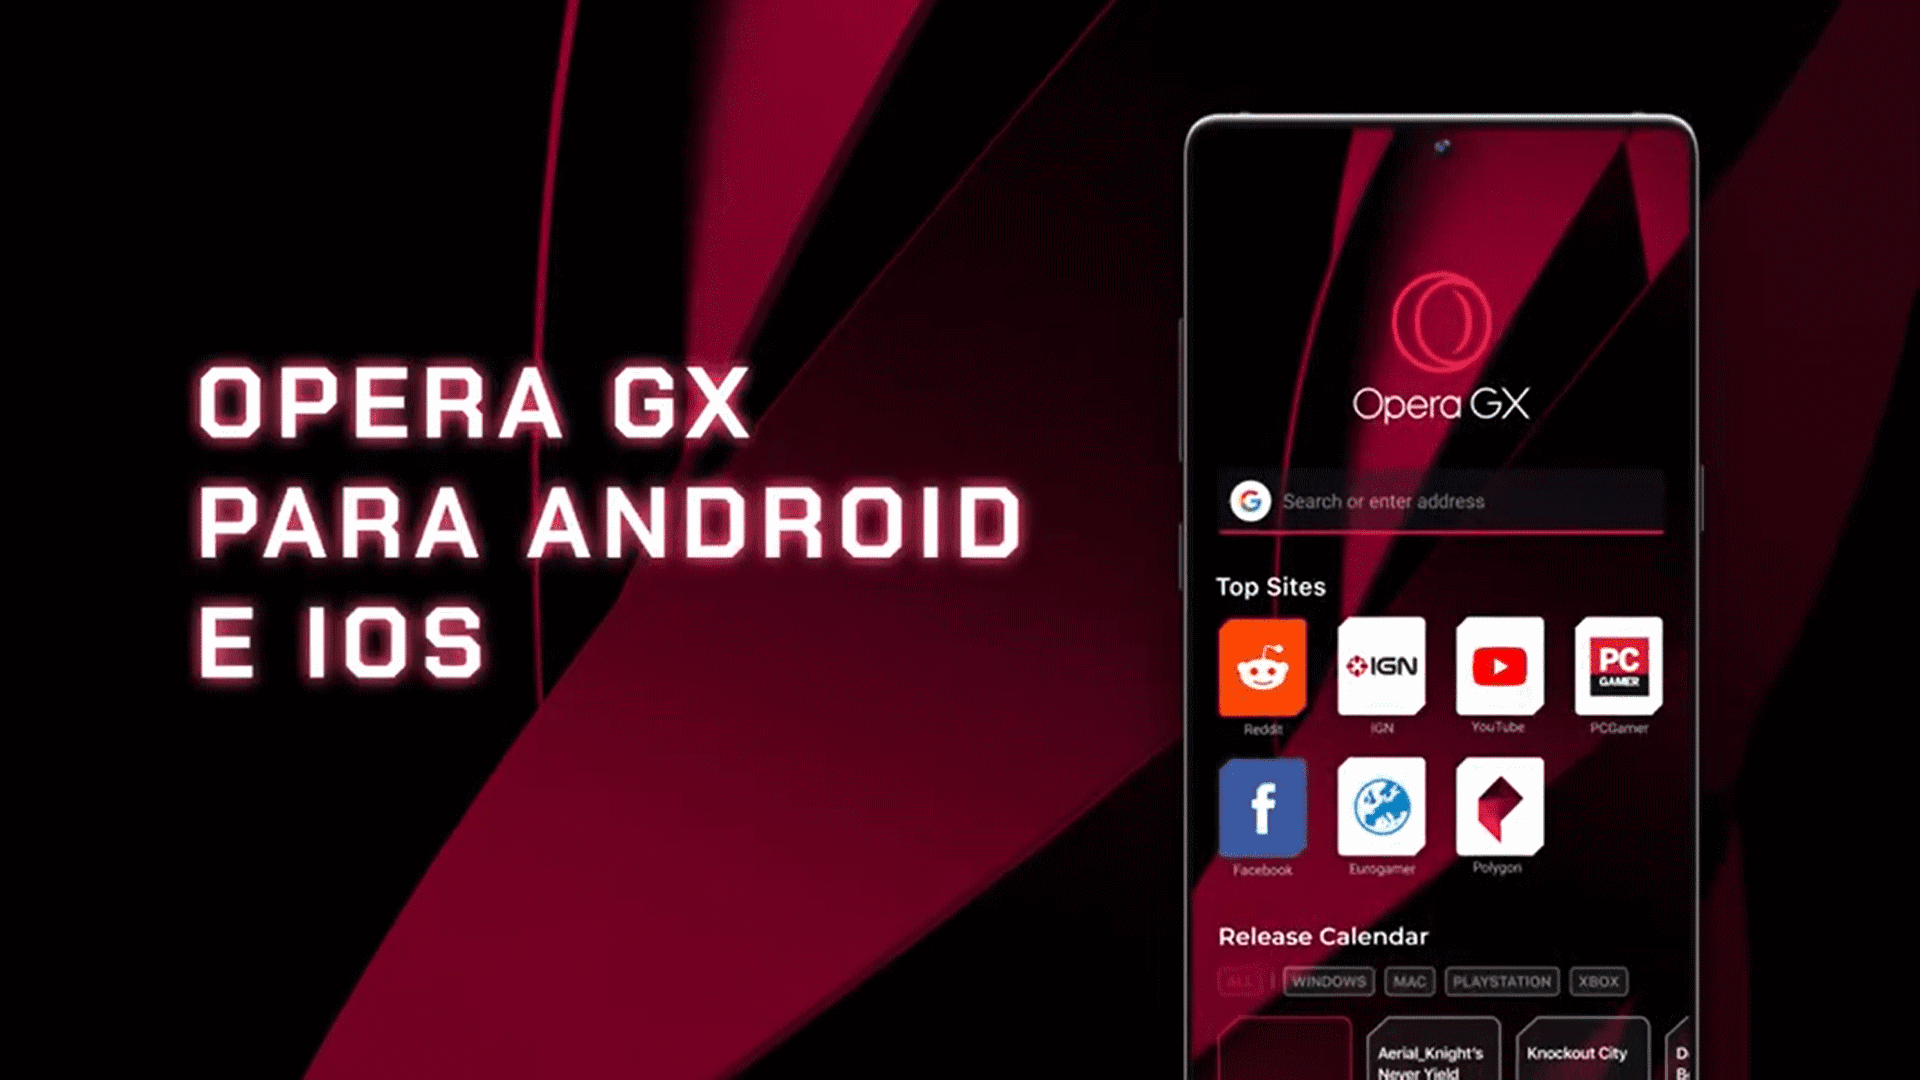 instal the new version for android Opera GX 101.0.4843.55